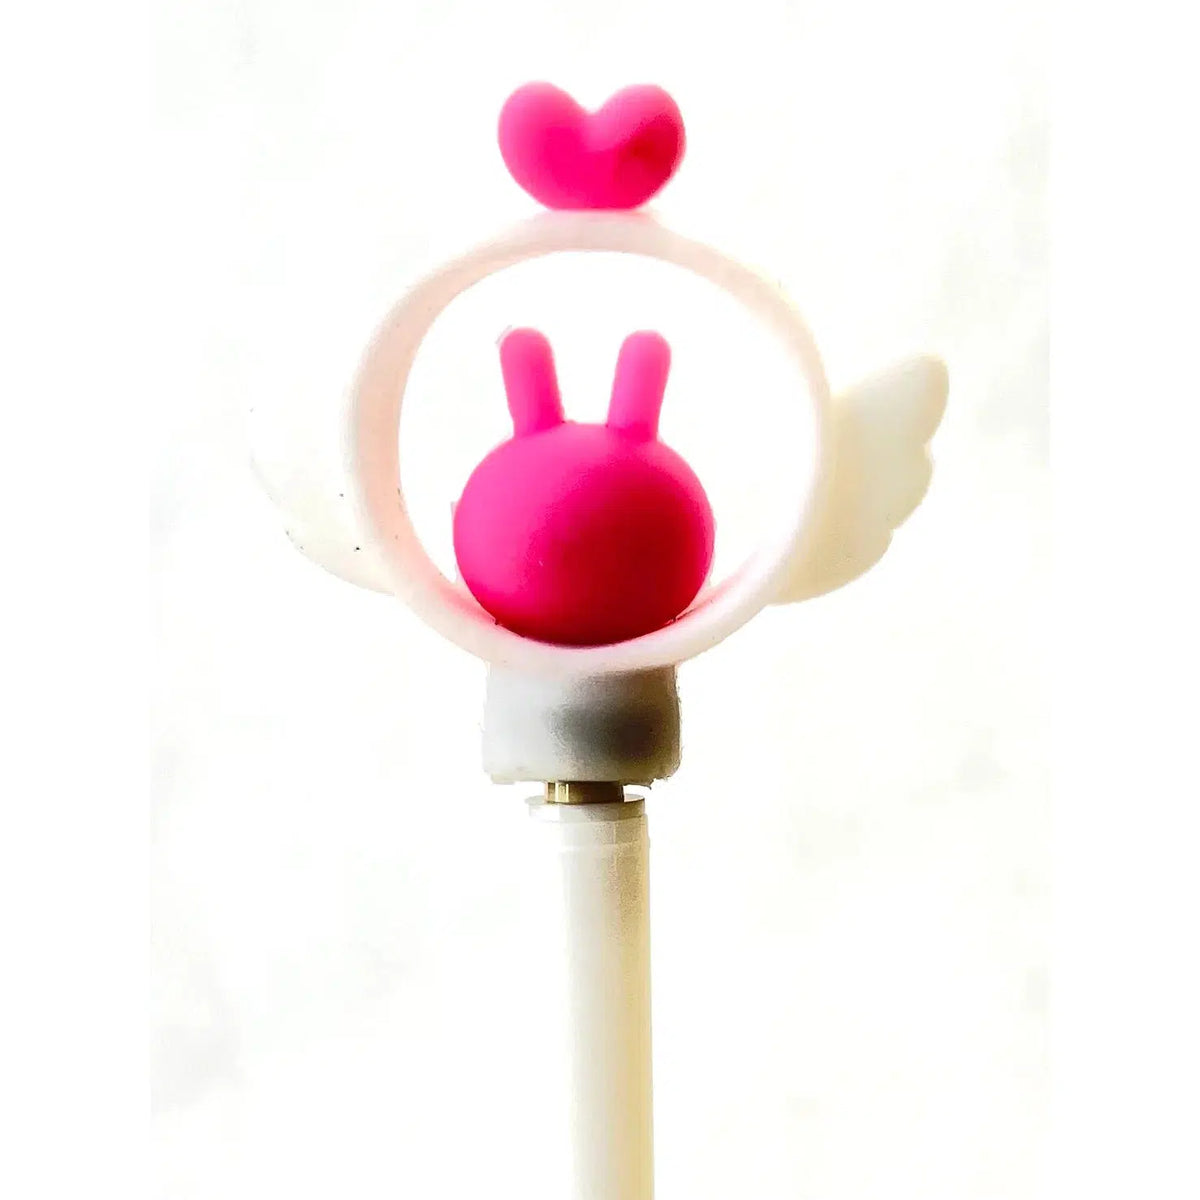 Front view of the hot pink heart with white pen Magic Wand Gel Pen.